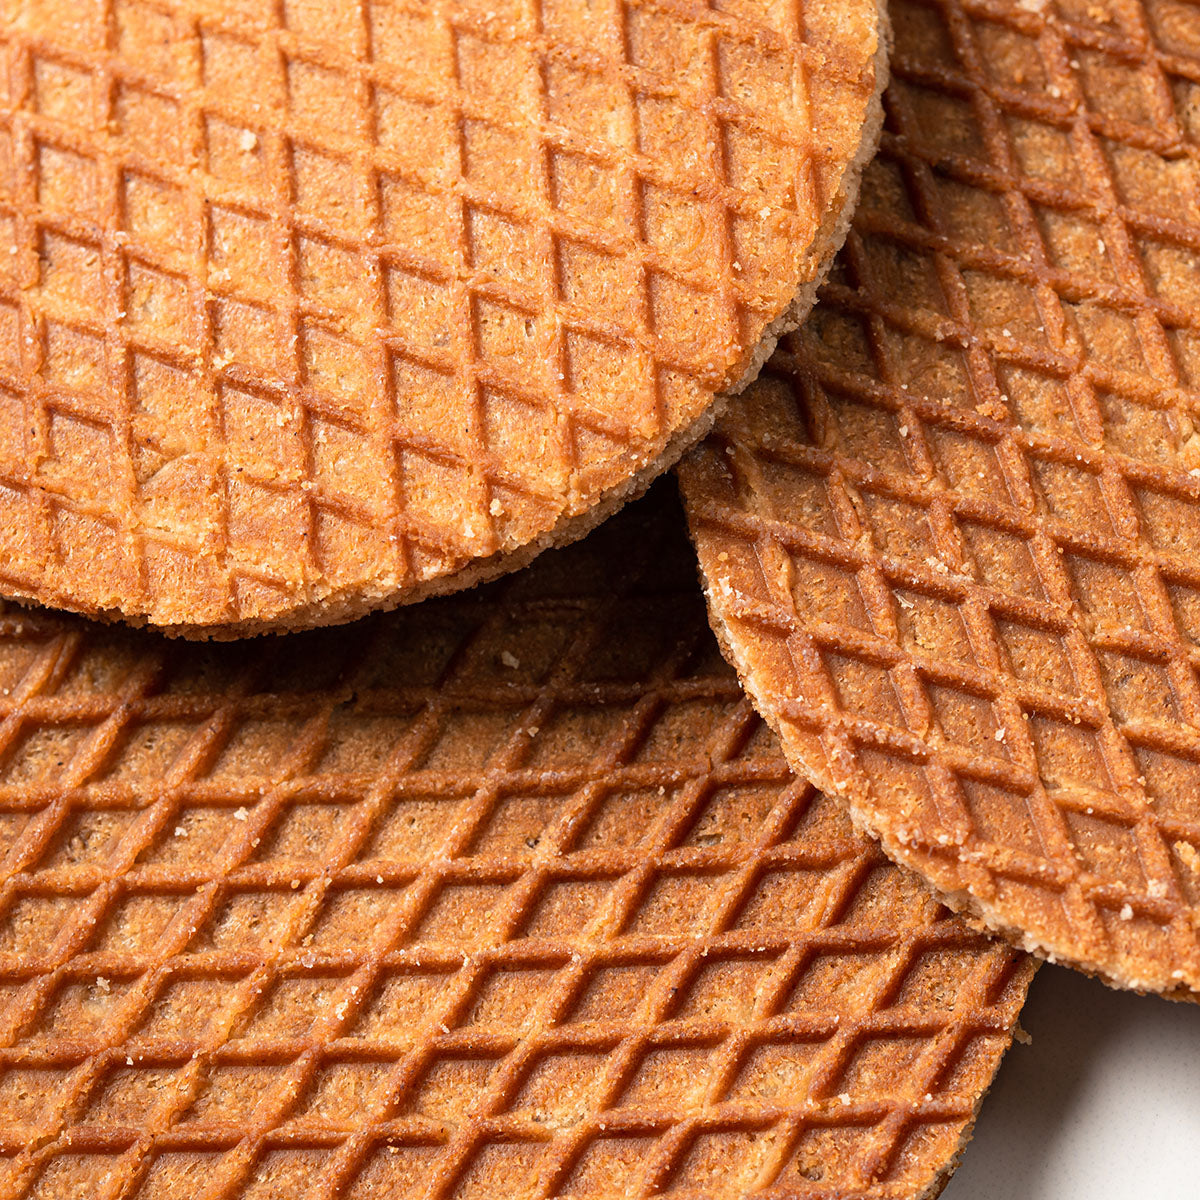 An authentic group of Double Authentic Mixed Tin Cans by Wonderen Stroopwafels on a white plate.